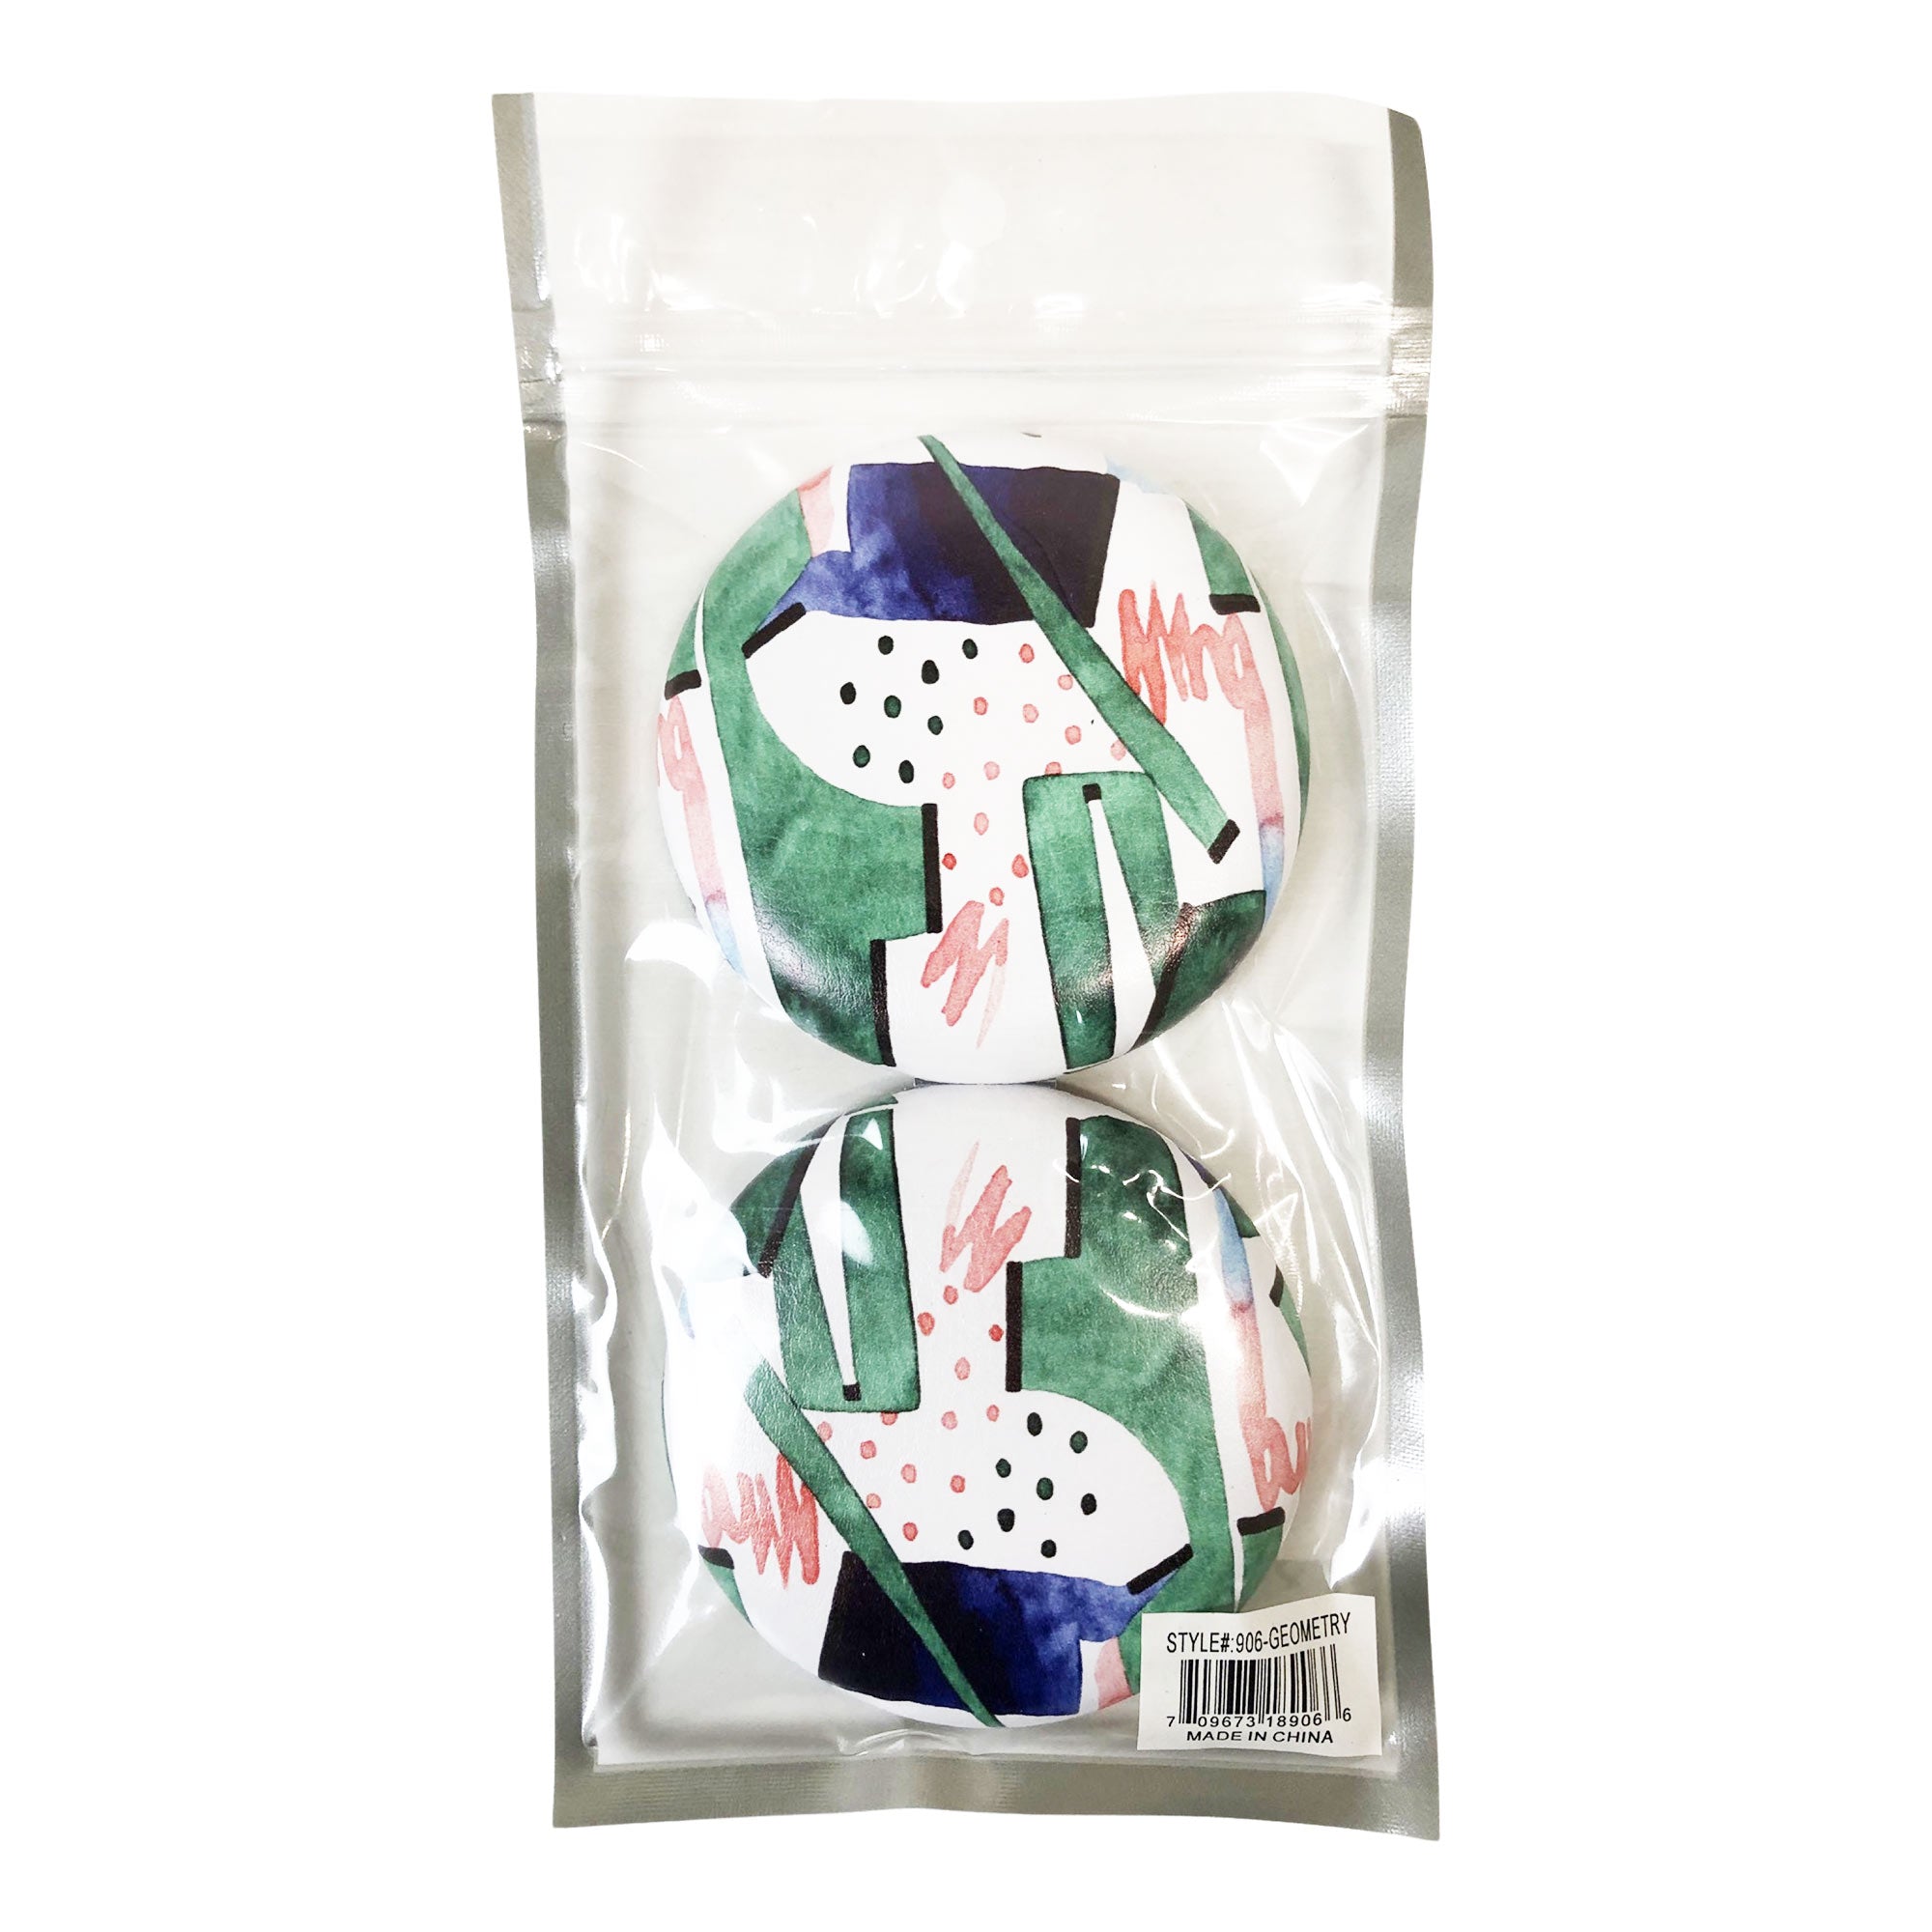 CLEARANCE COSMETIC MIRRORS GEOMETRIC PRINTS (CASE OF 48 - $1.50 / PIECE)  Wholesale Round Cosmetic Mirrors in Assorted Prints SKU: 906-GEOMETRY-48